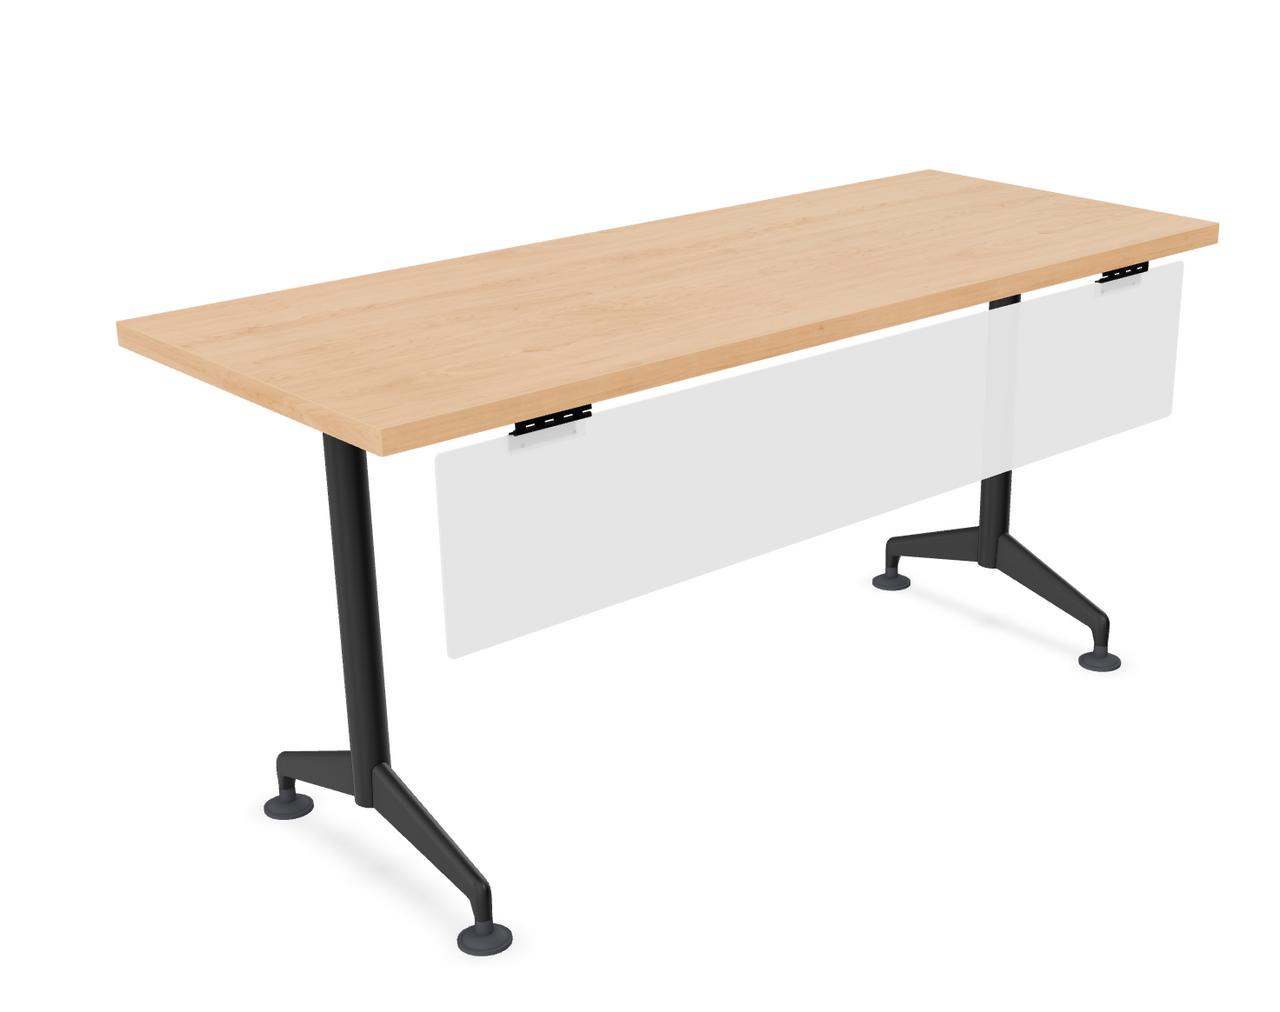  Special-T Zia Stationary Top Counter Height Rectangular Table 